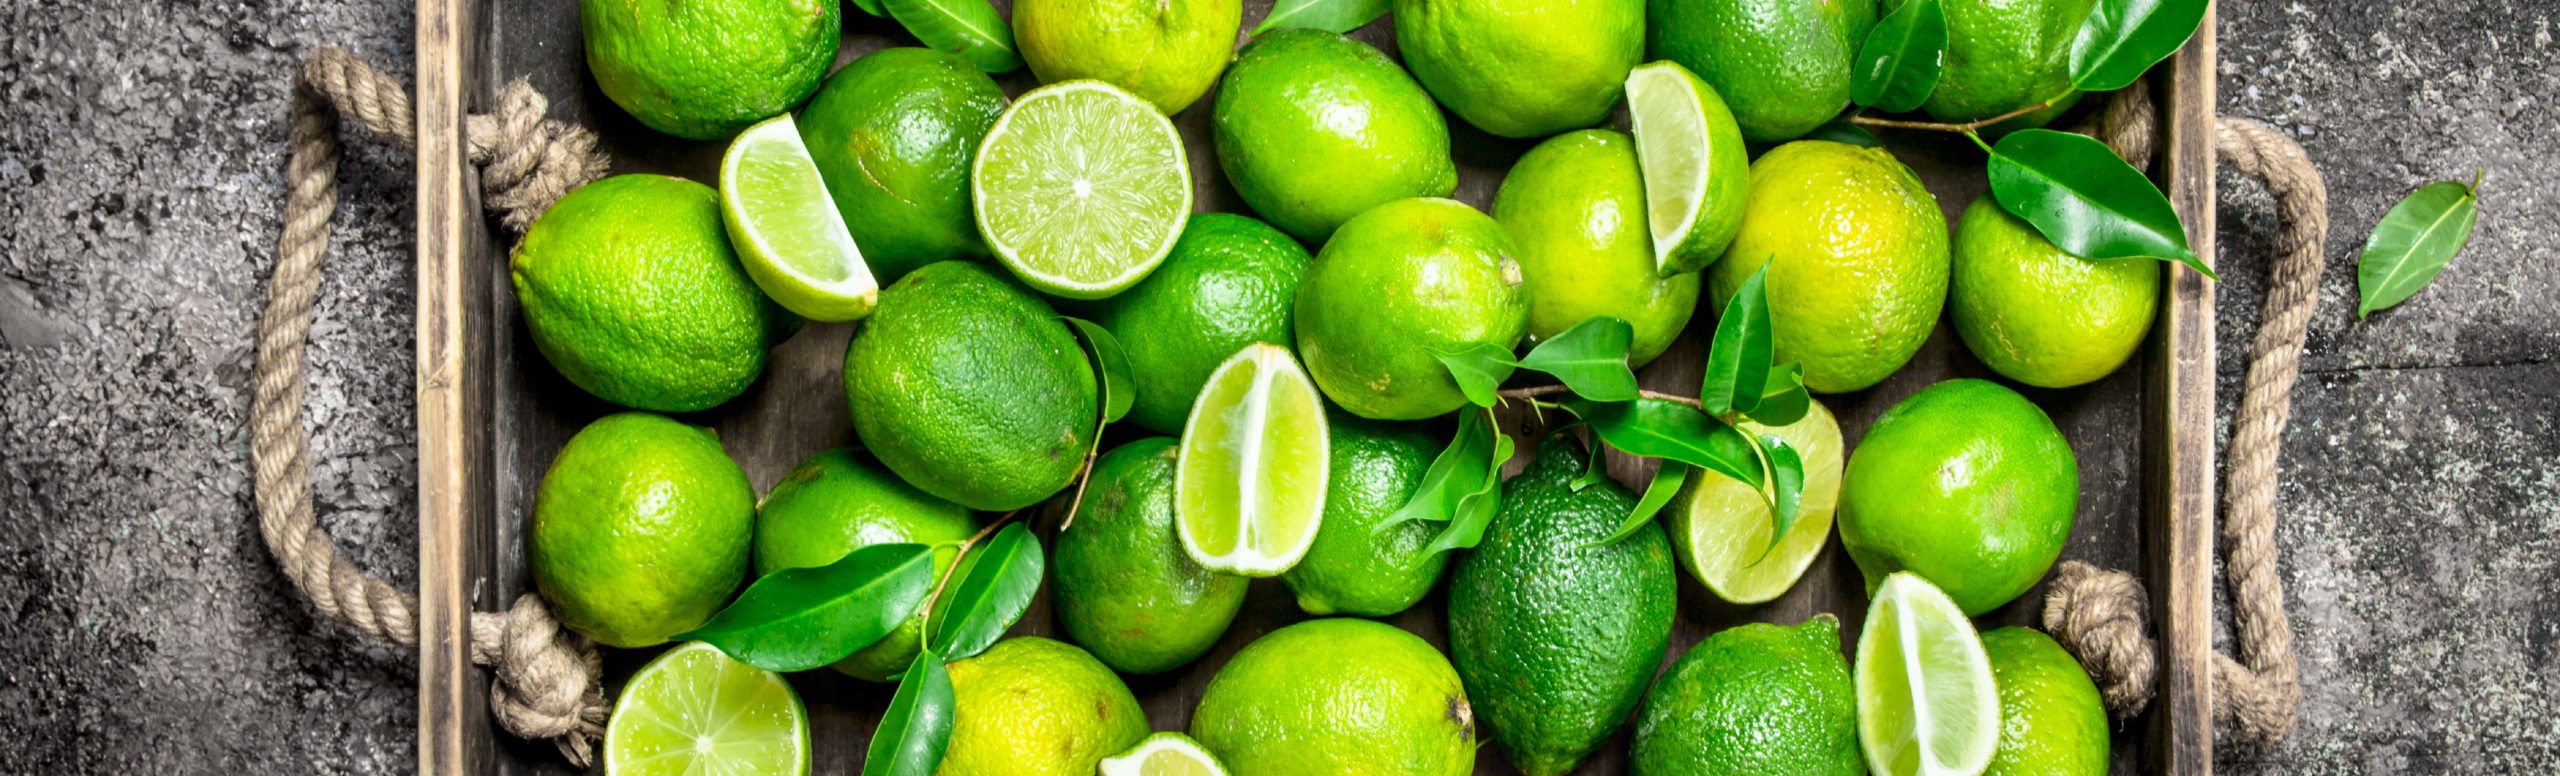 Lime Has as Much Citrusy Superpower Punch as its Big Brother, Lemon